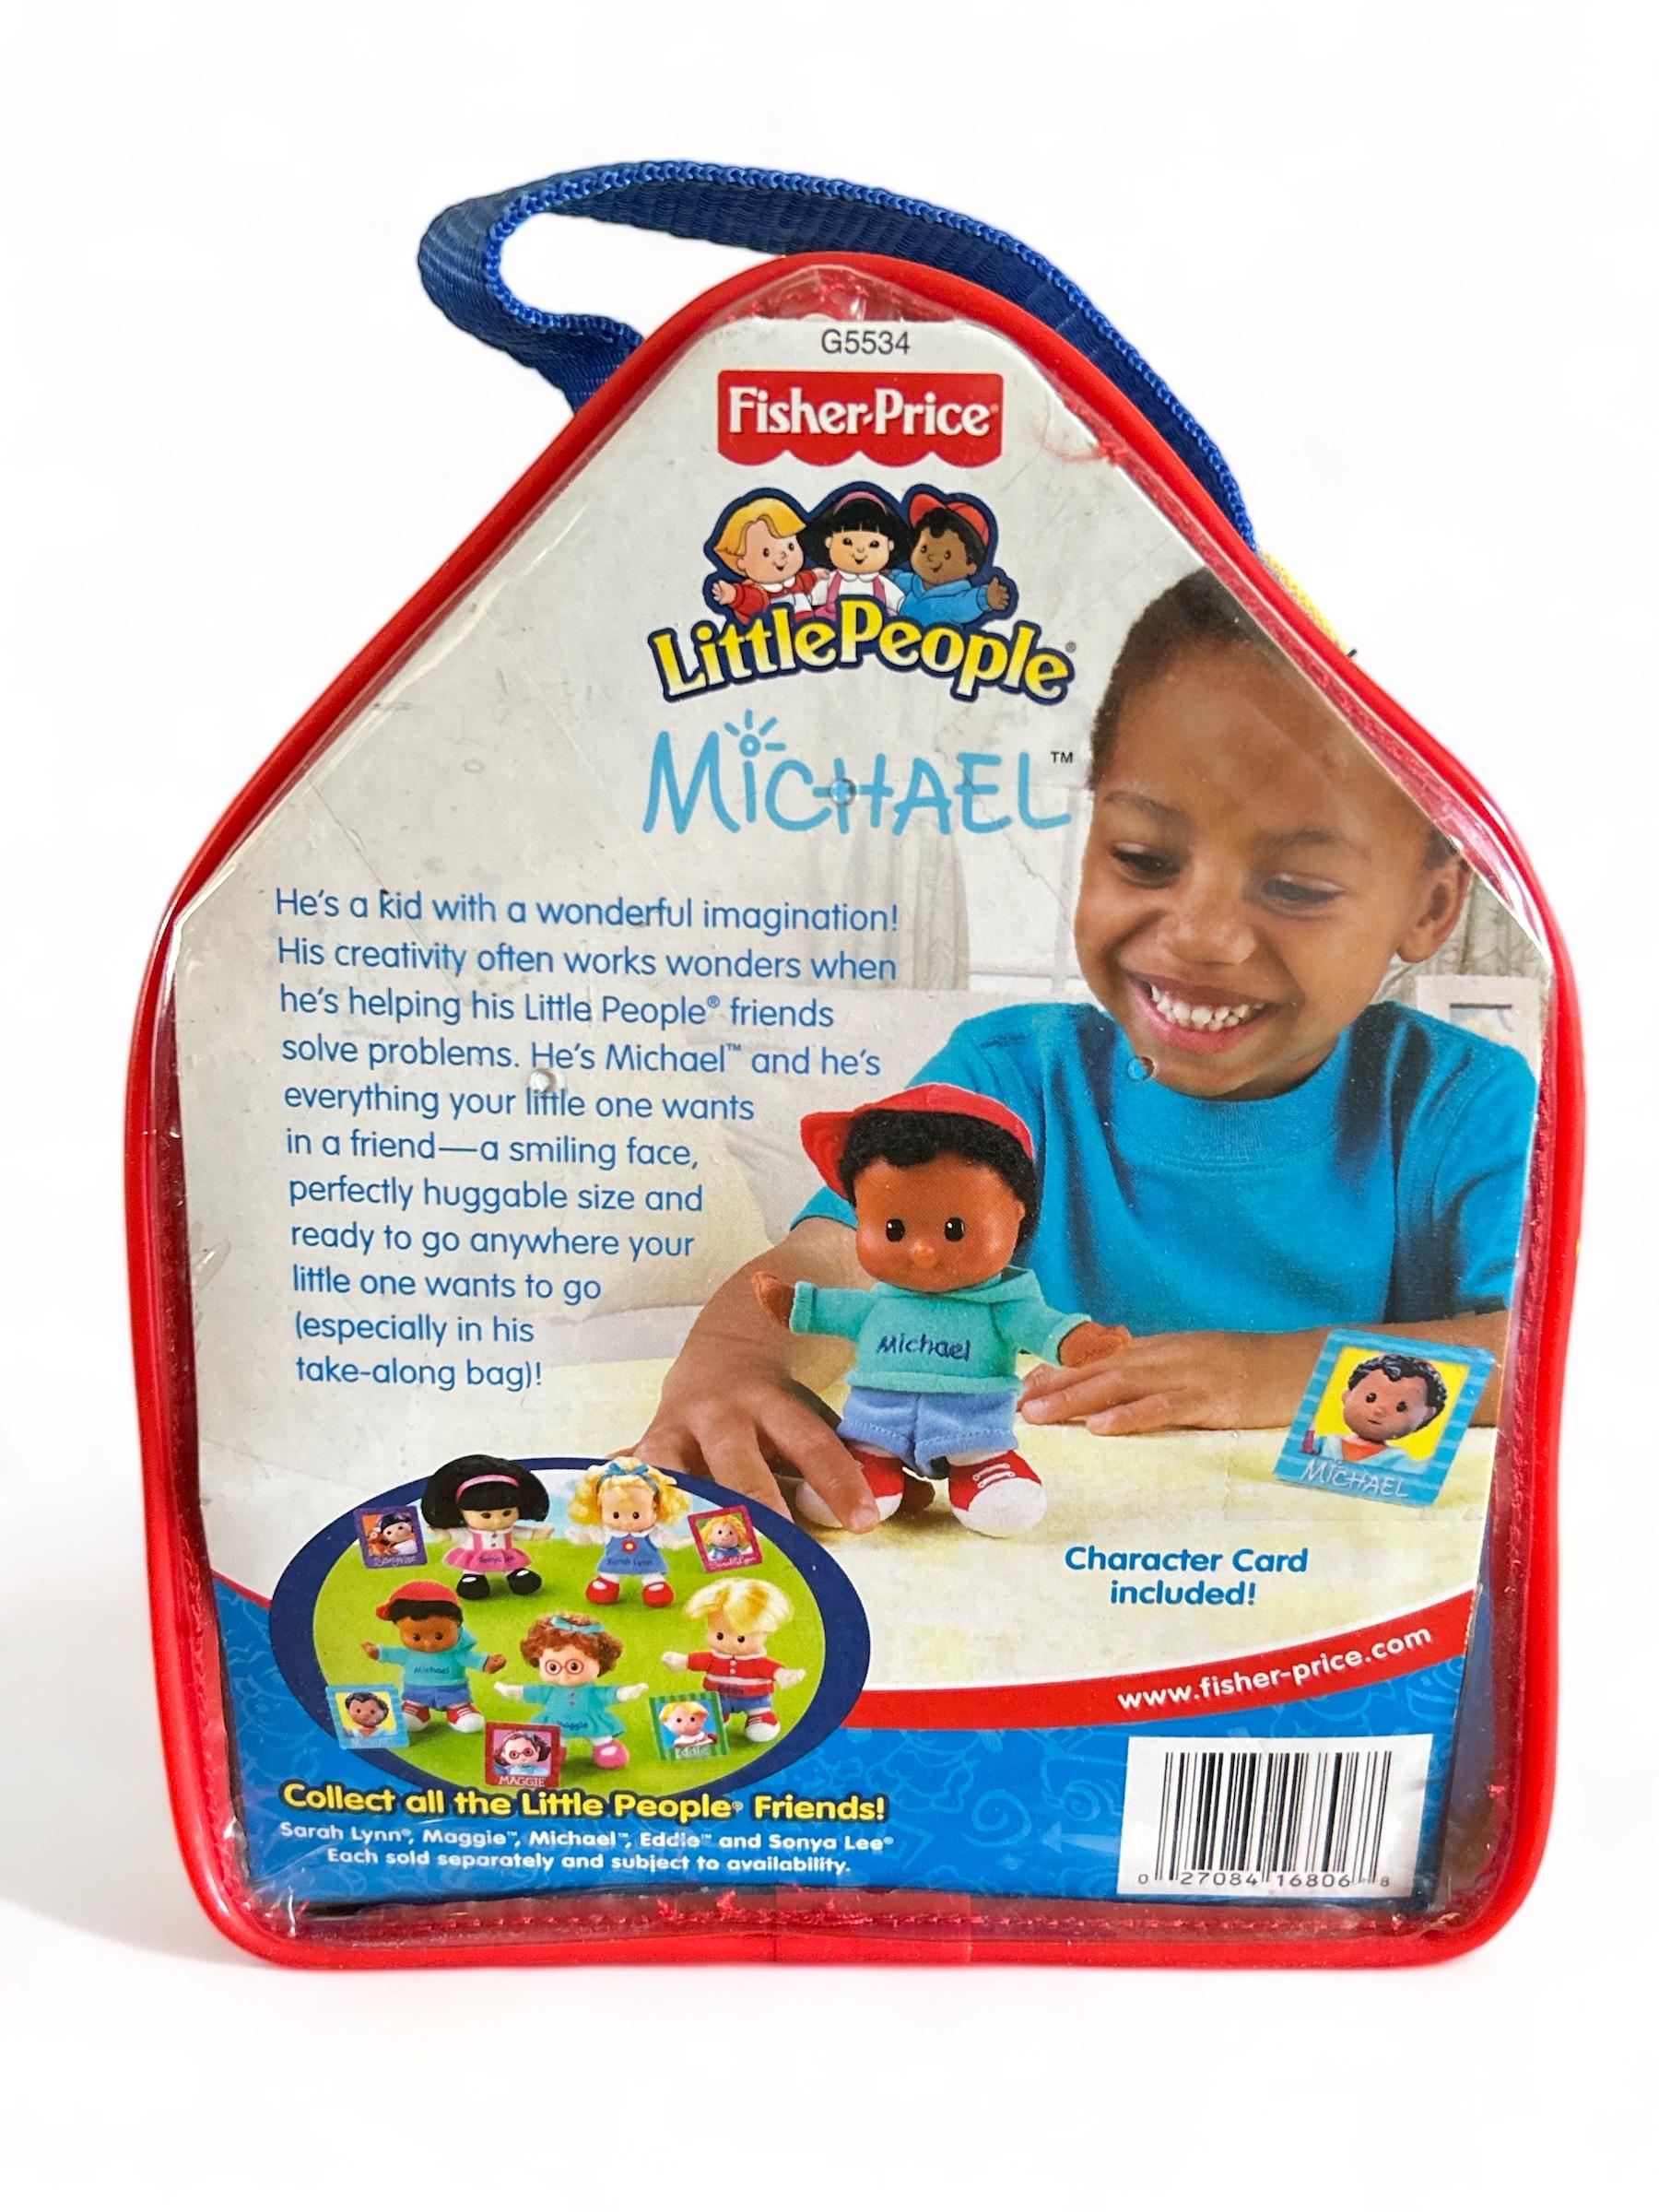 Fisher-Price Little People "Michael" doll